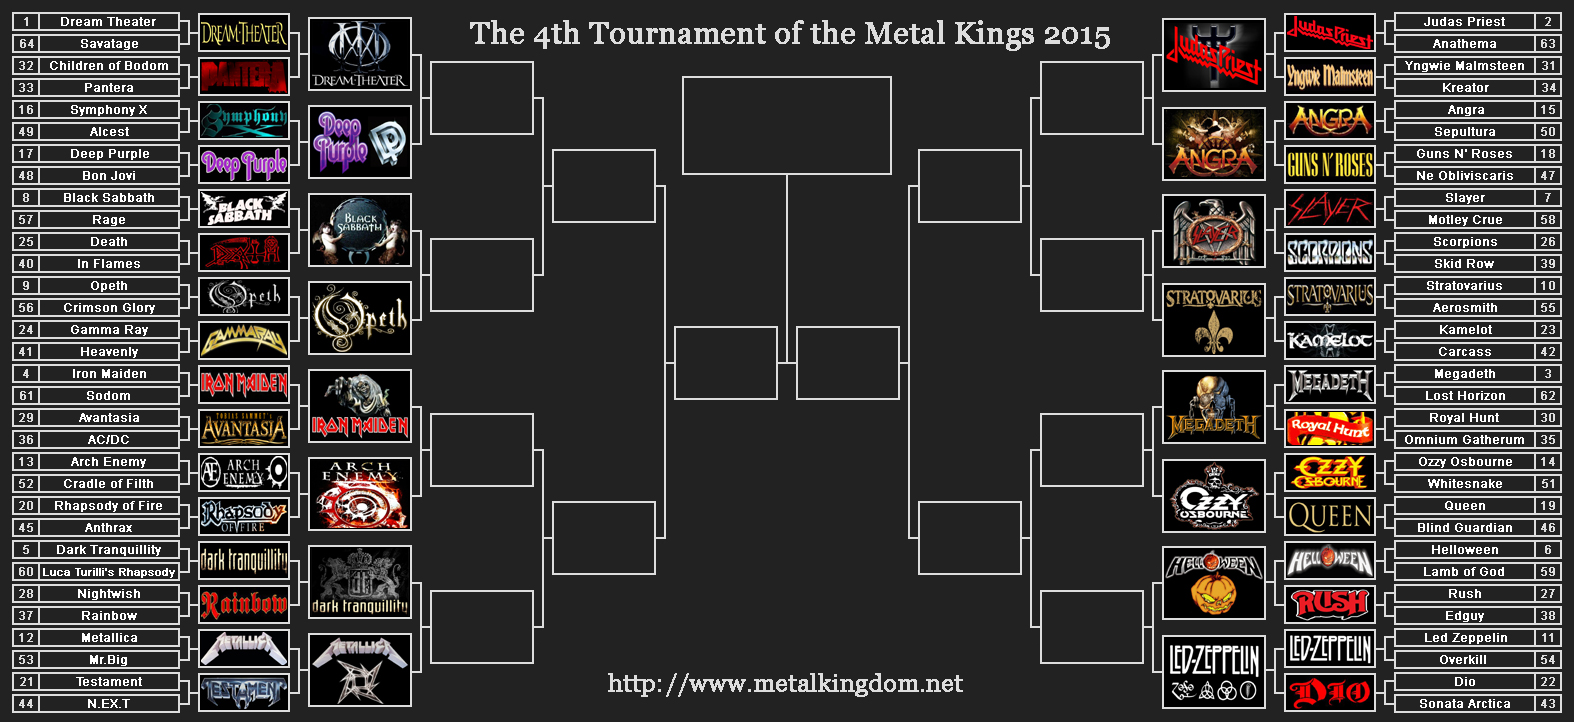 Tournament of the Metal Kings 2015 - Round of 16